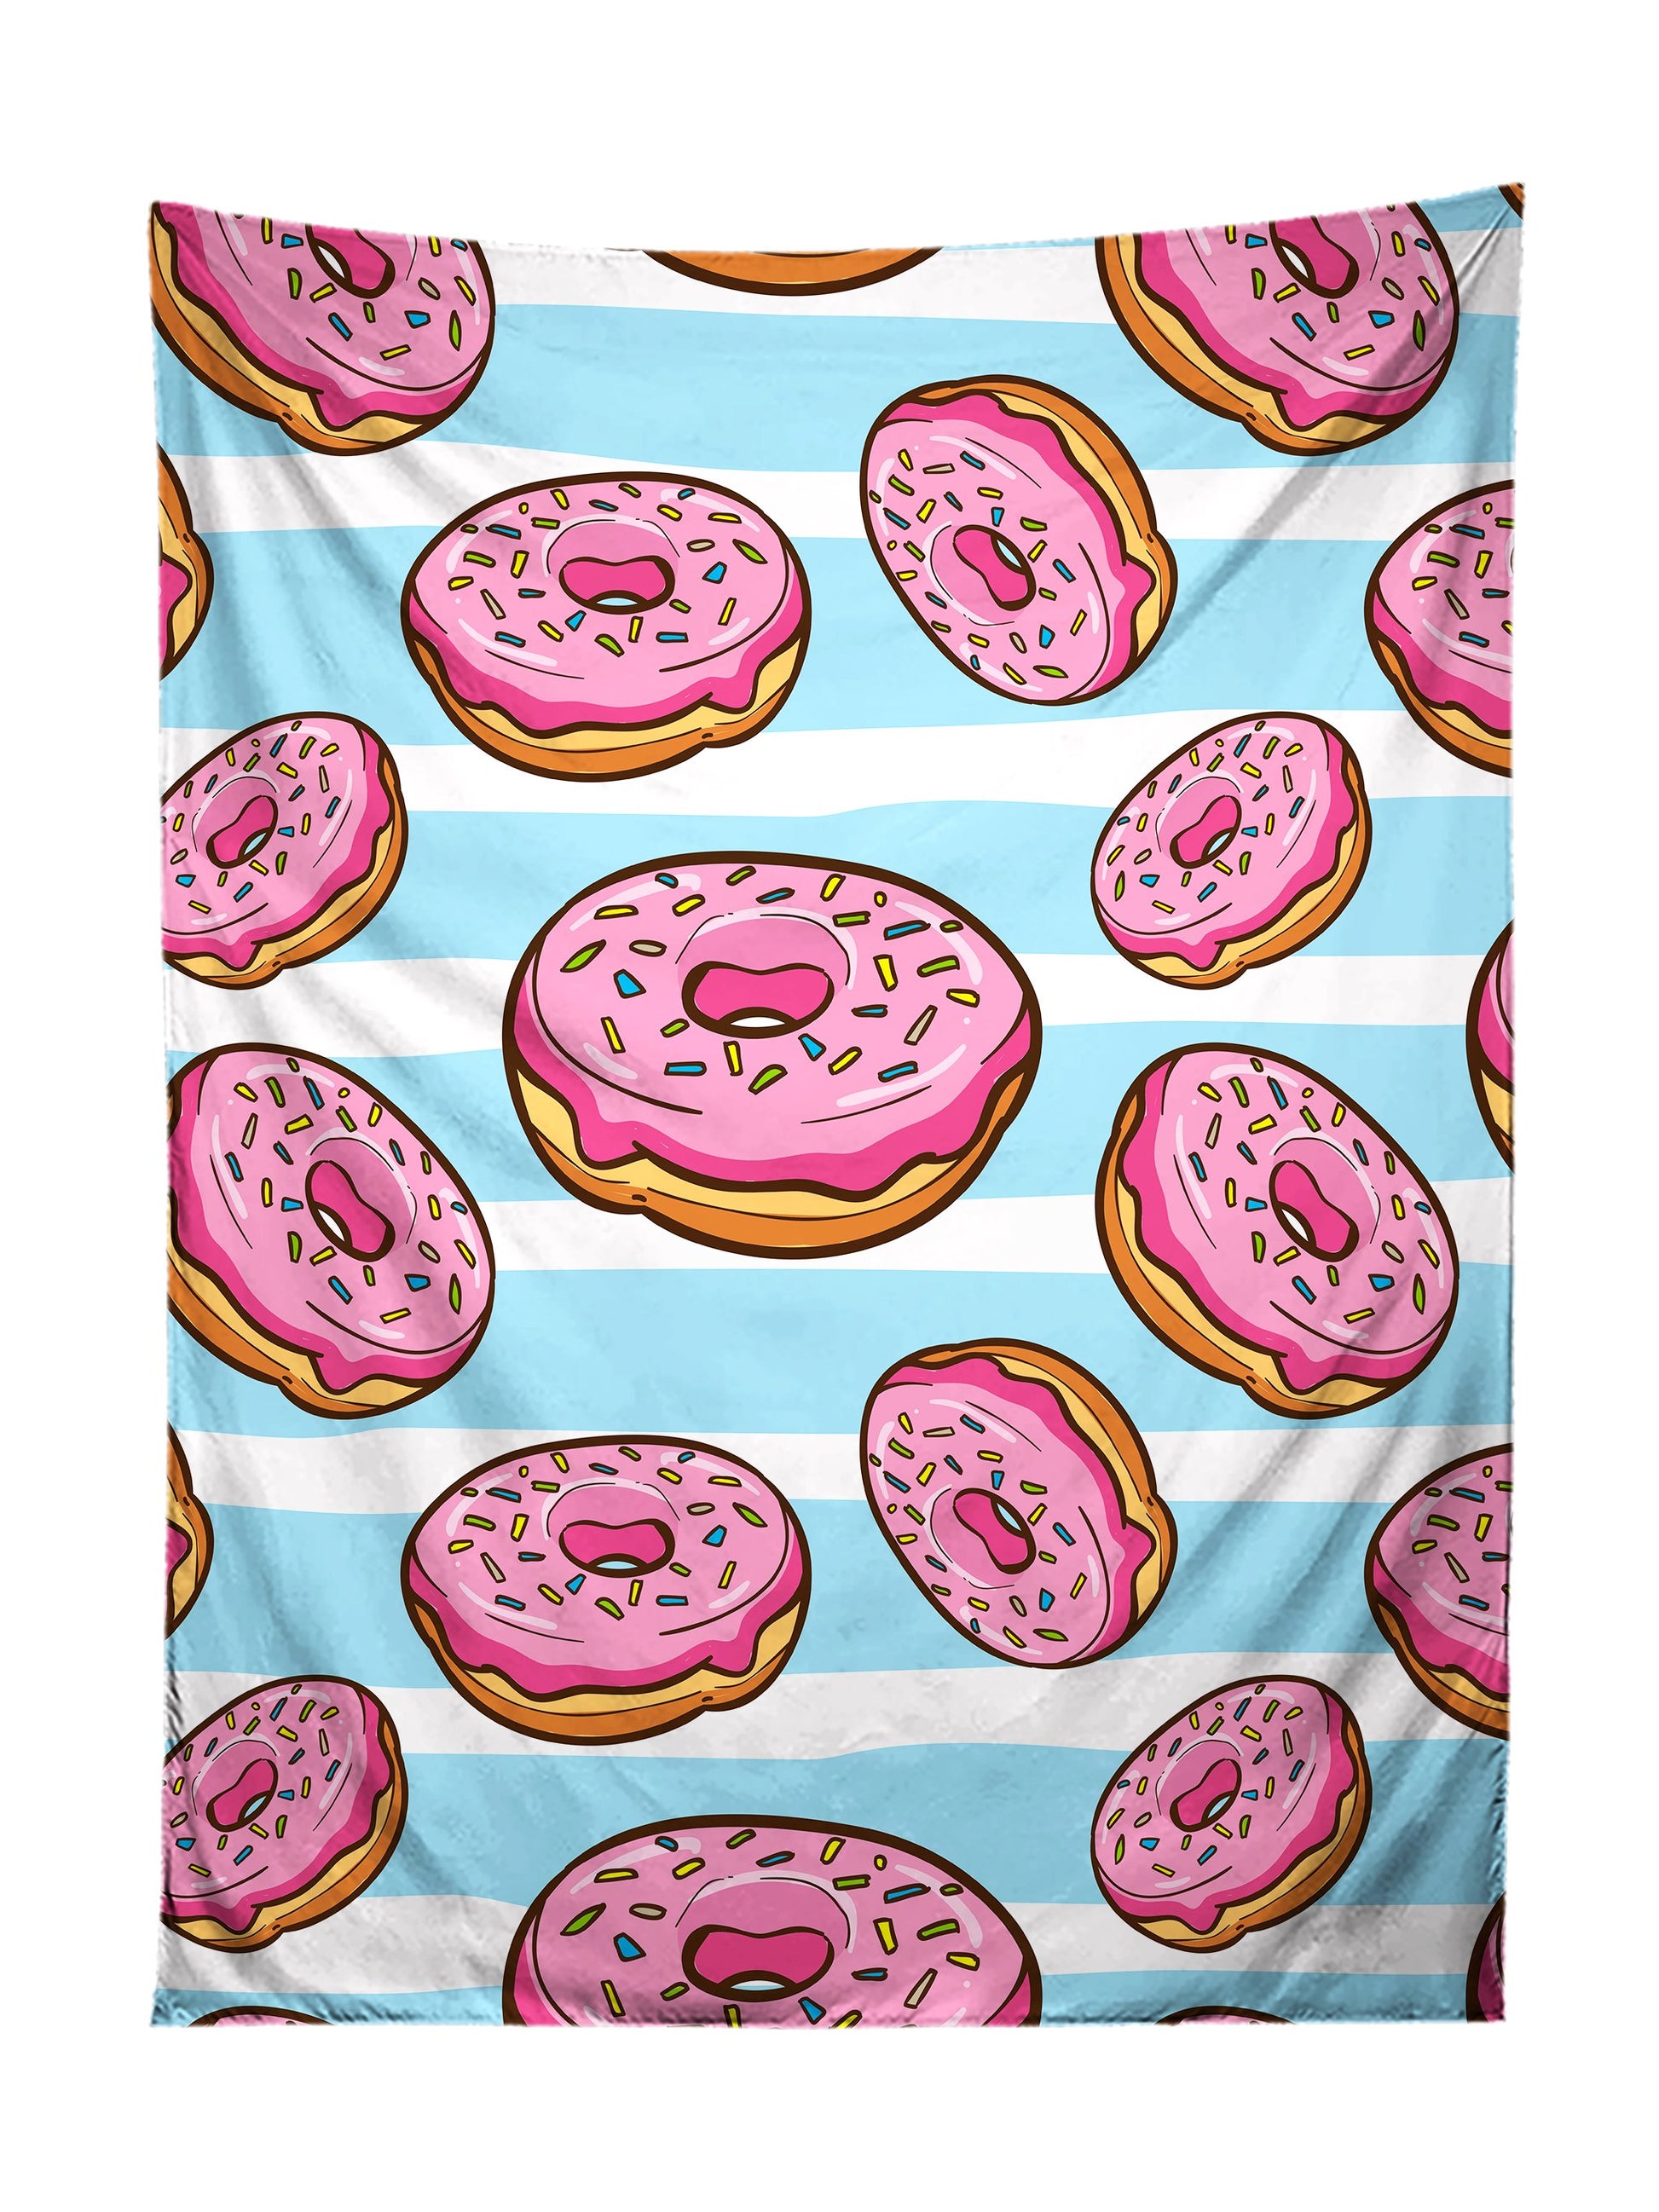 Vertical hanging view of all over print pink donut with blue & white striped background tapestry by GratefullyDyed Apparel.